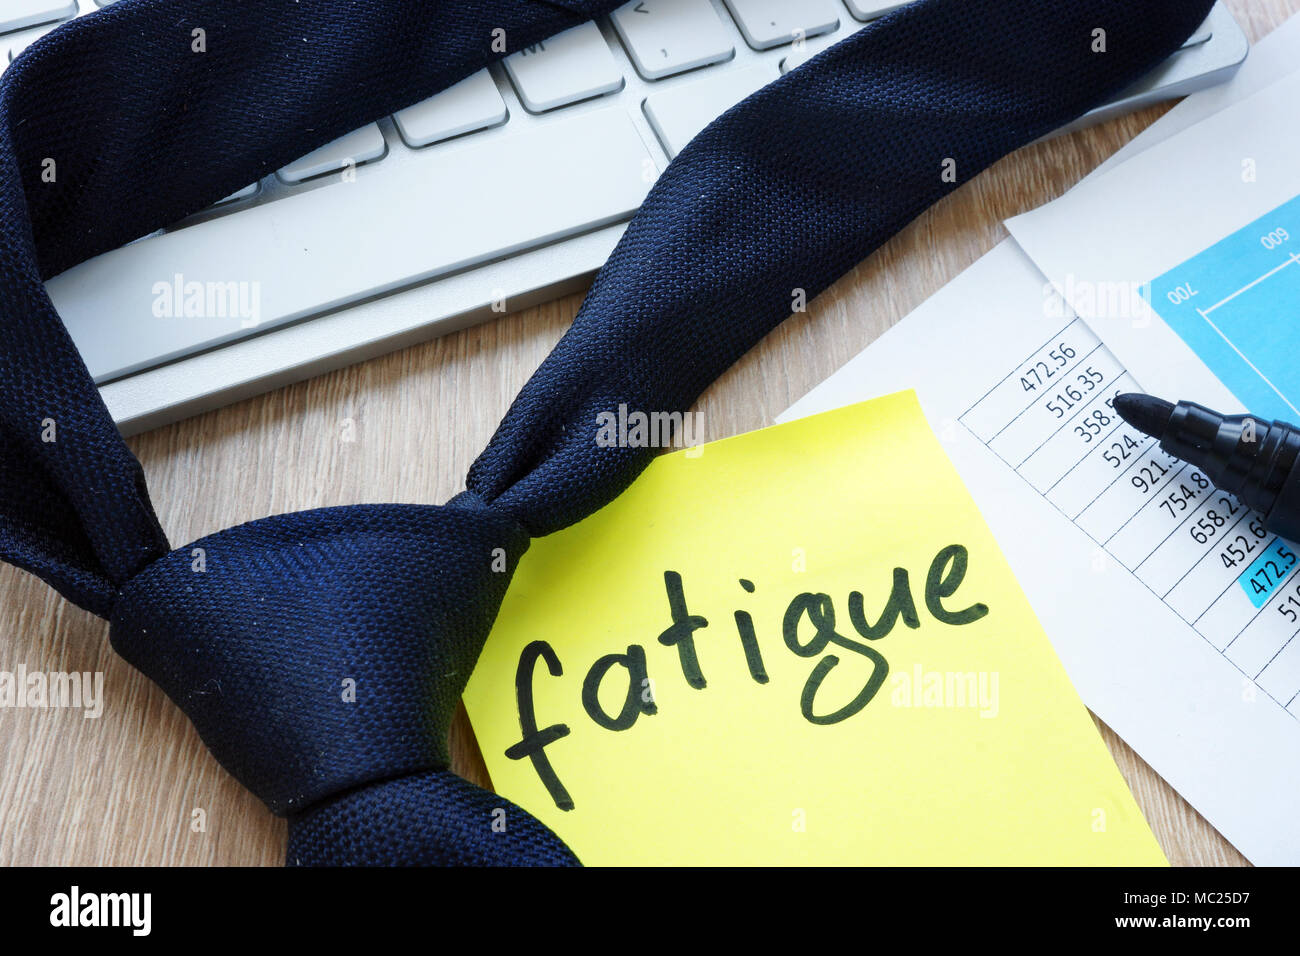 Tie and memo stick with word fatigue on an office desk. Stock Photo